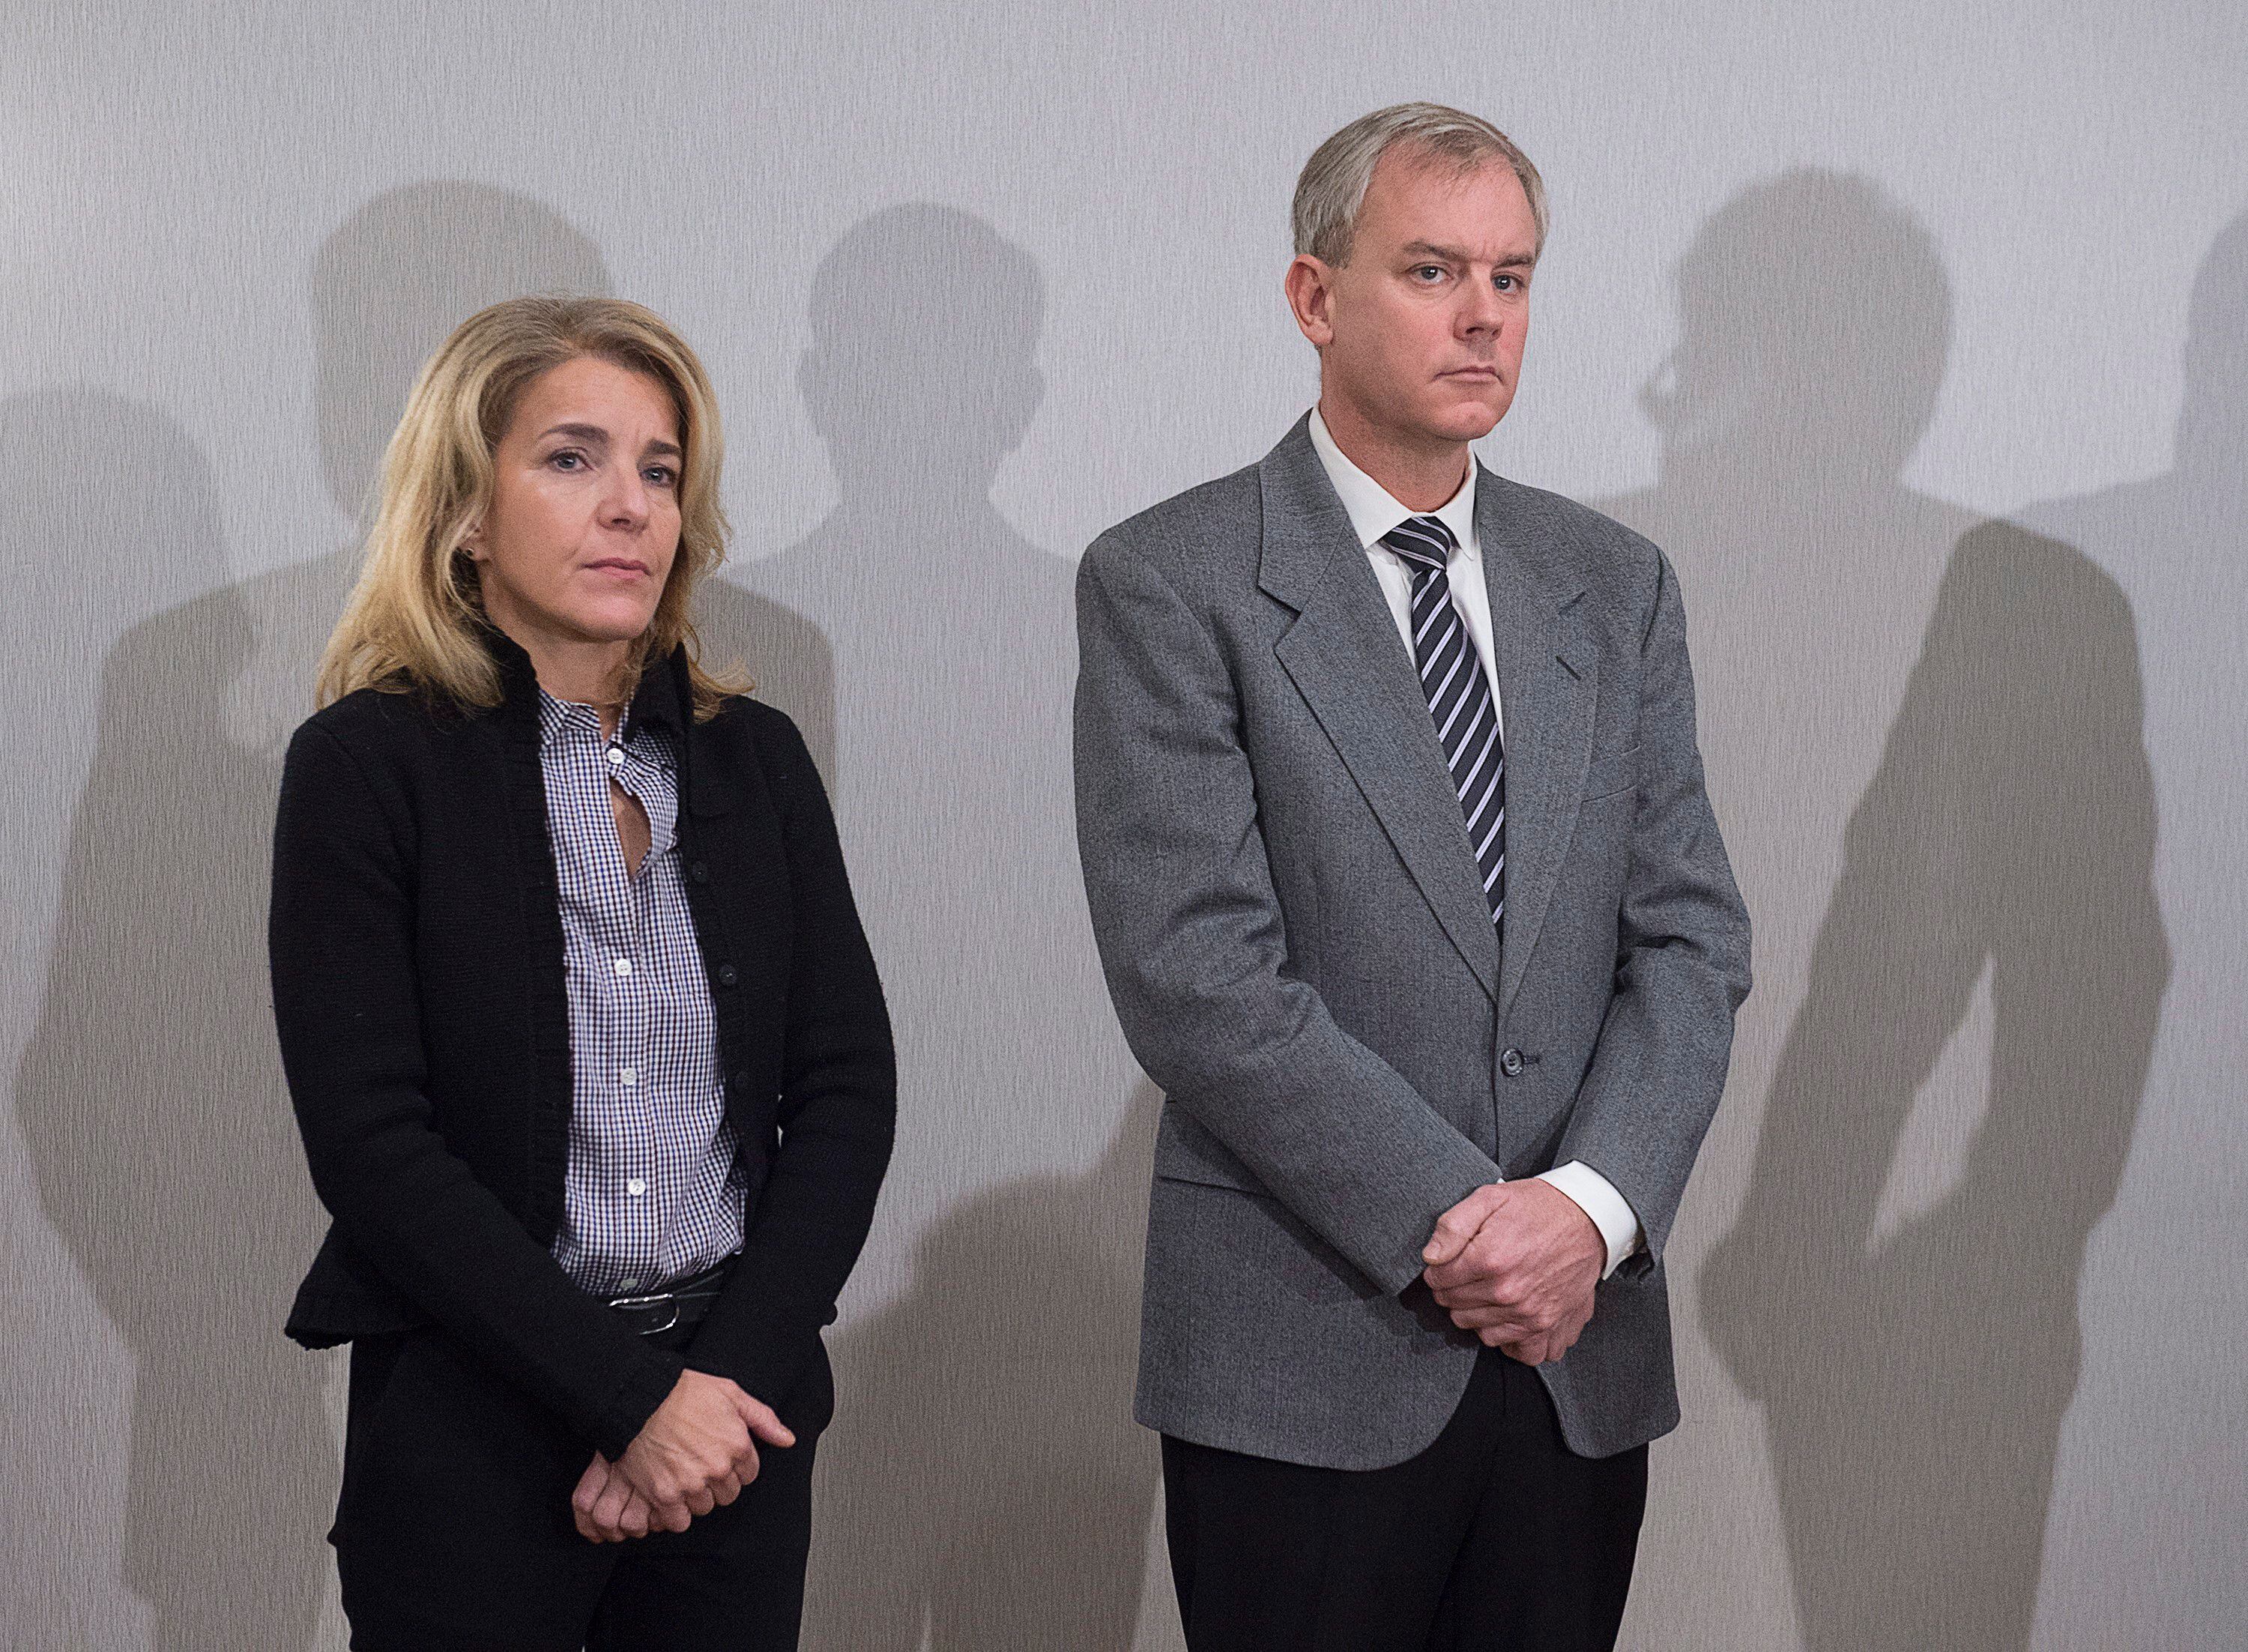 Dennis Oland Killed His Father In A Rage Prosecutors Tell Trial The Globe And Mail